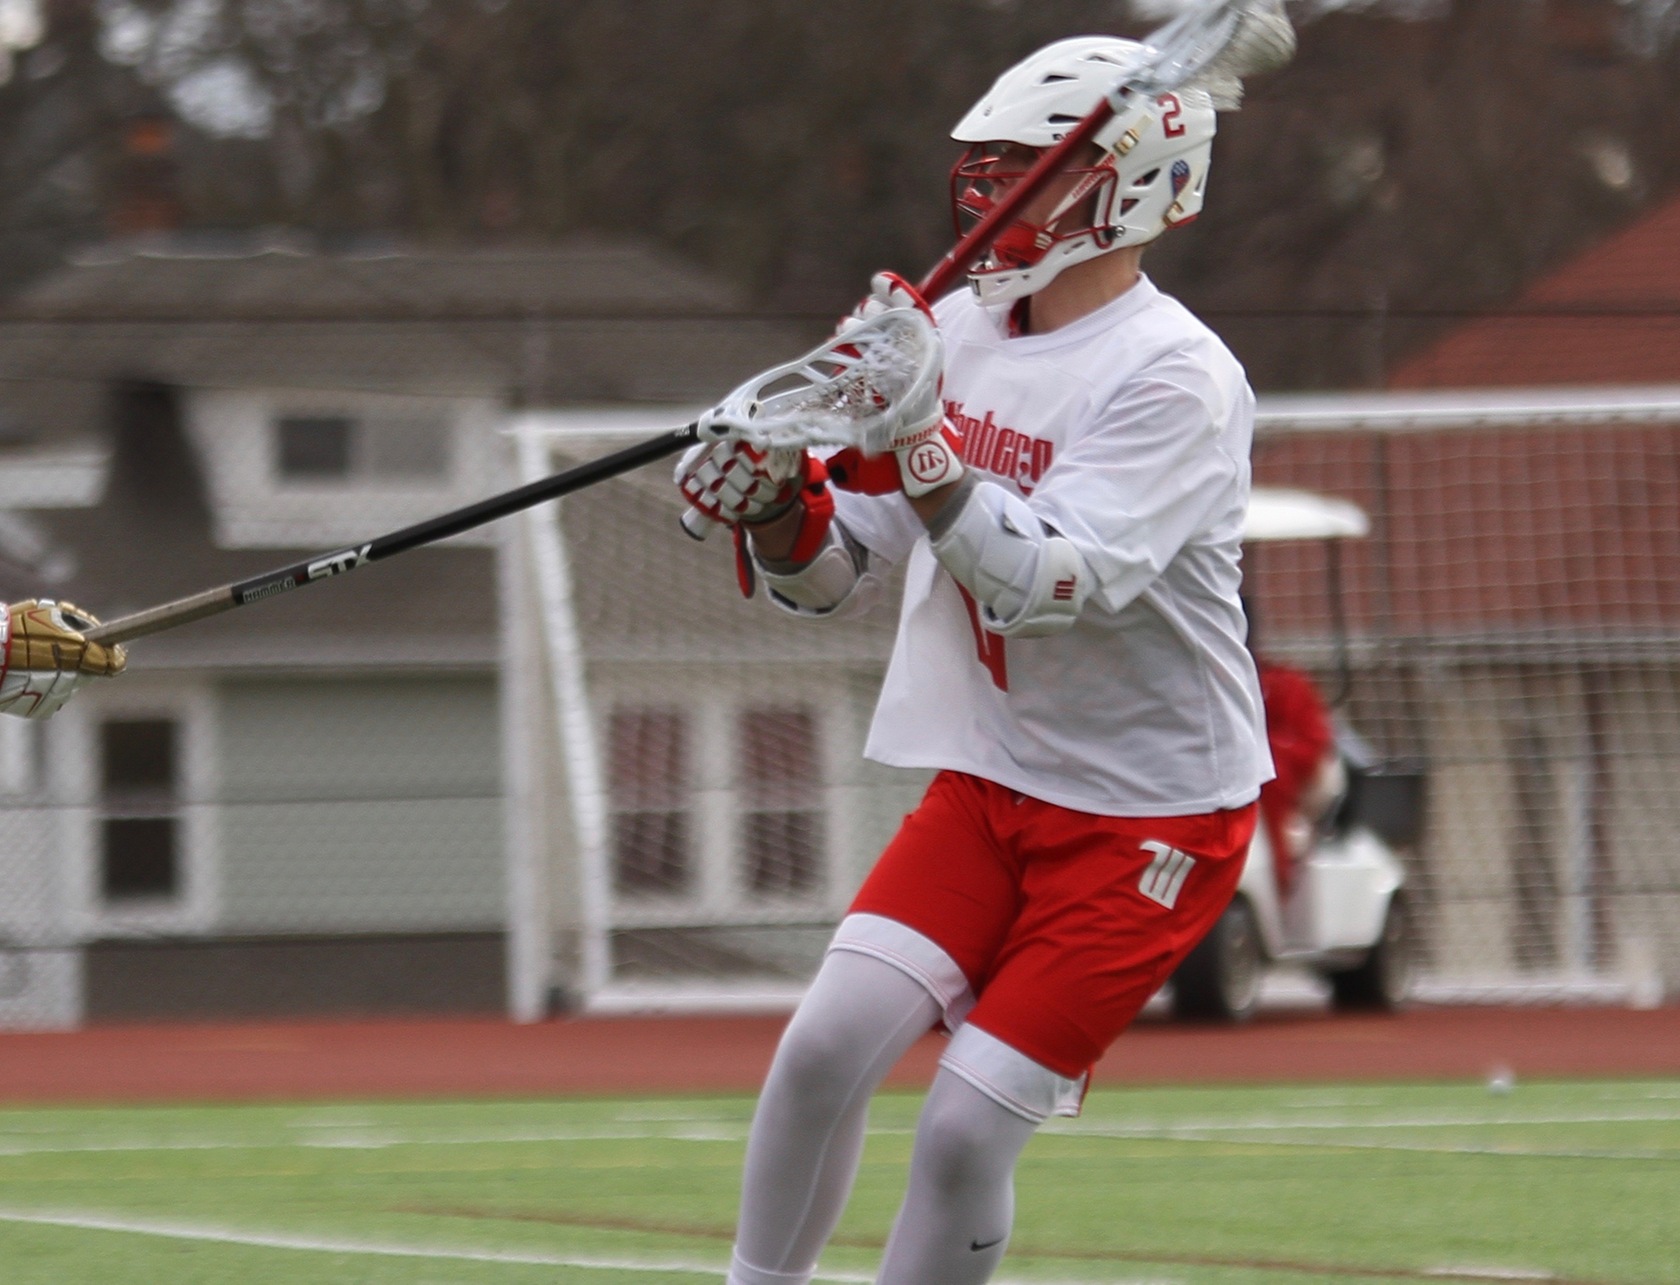 Sophomore Andrew Ellis scored a career-high seven goals in Wittenberg's 15-4 win over Oberlin in the NCAC opener on Saturday